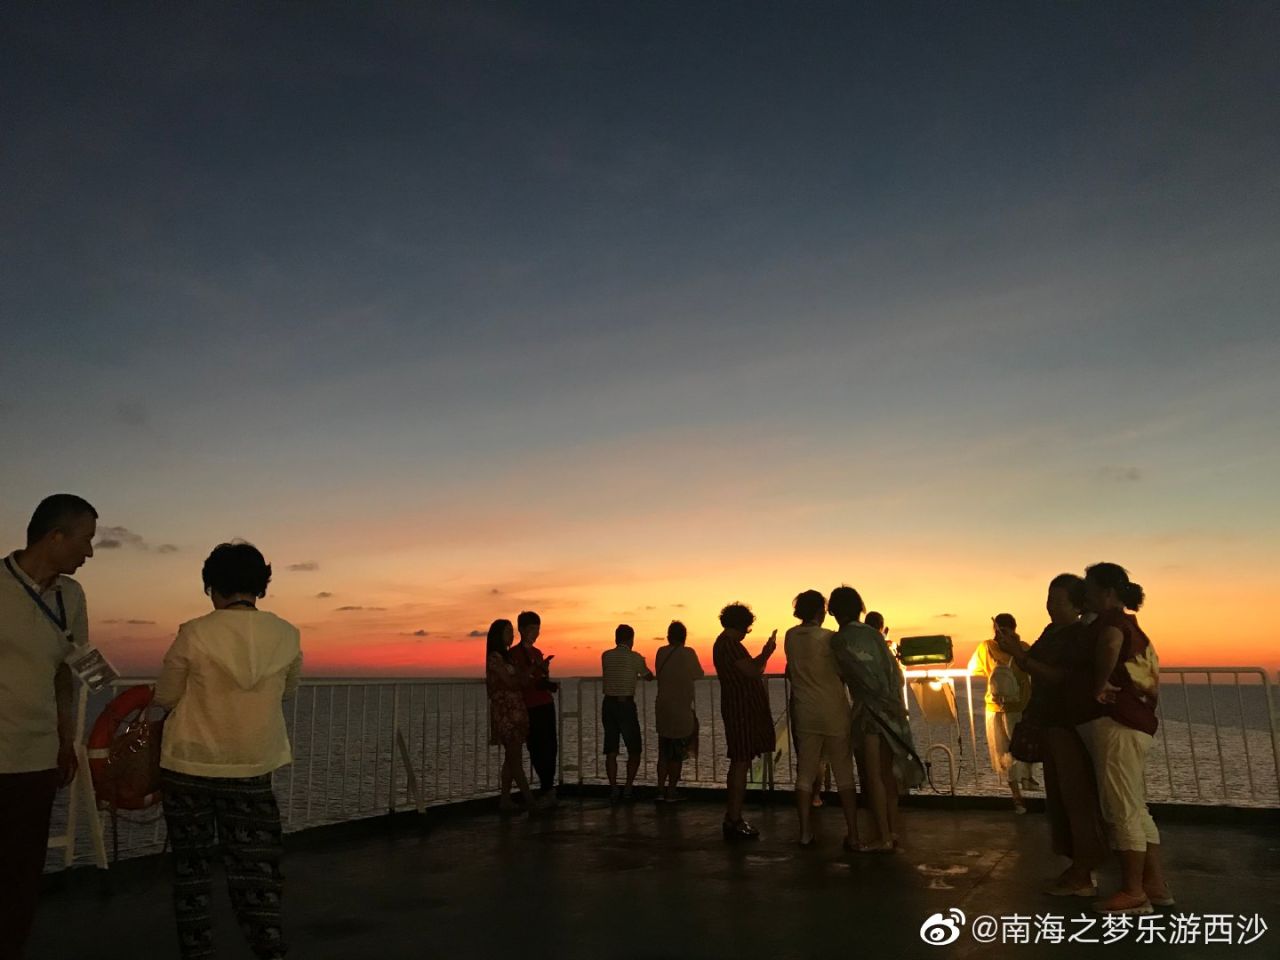 Sunset, viewed from on board the Nanhai Dream.